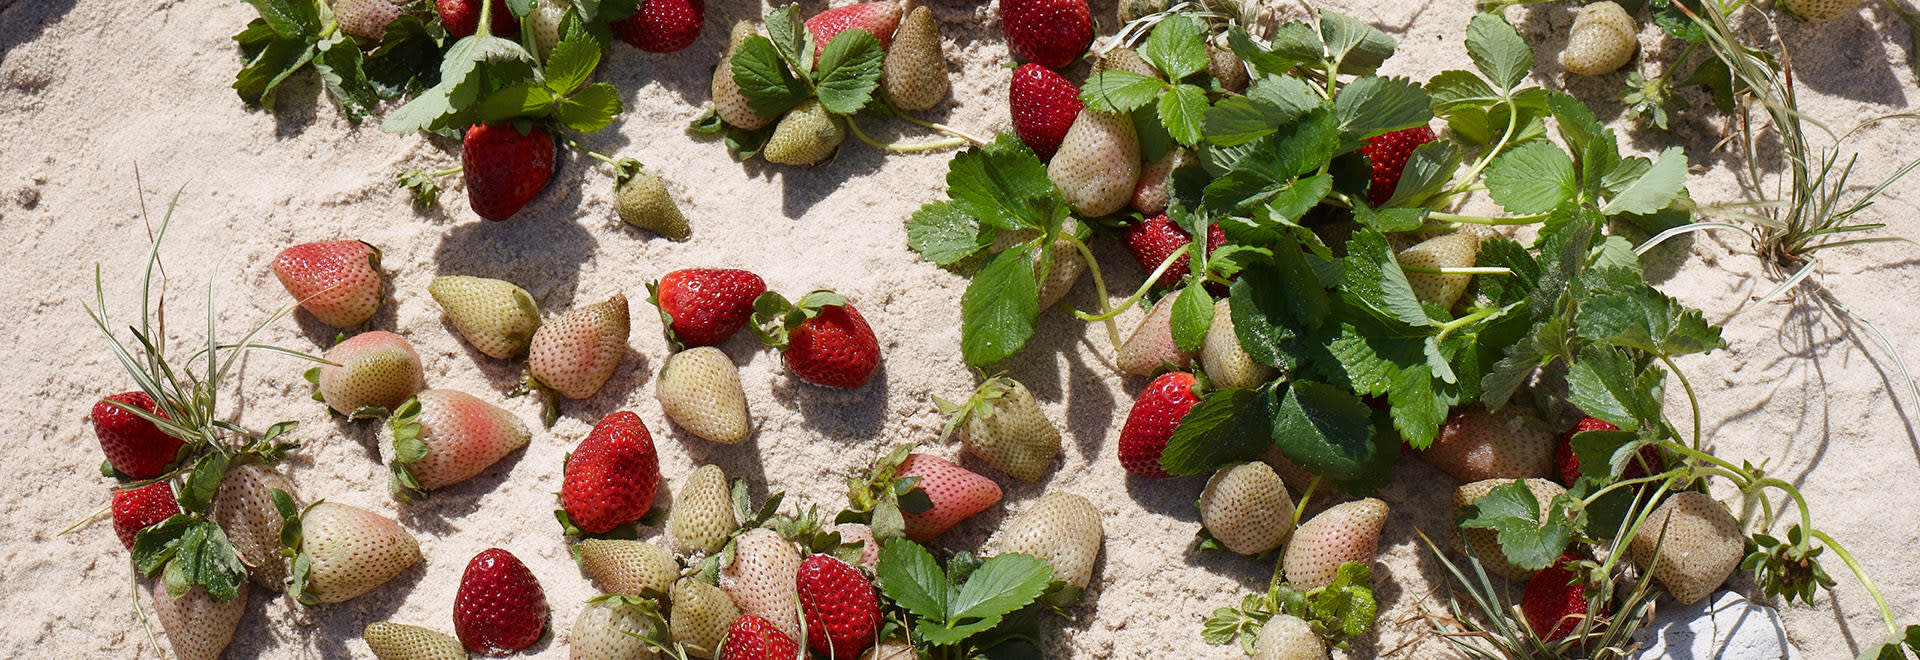 A photo of stawberries in the sand on the beach